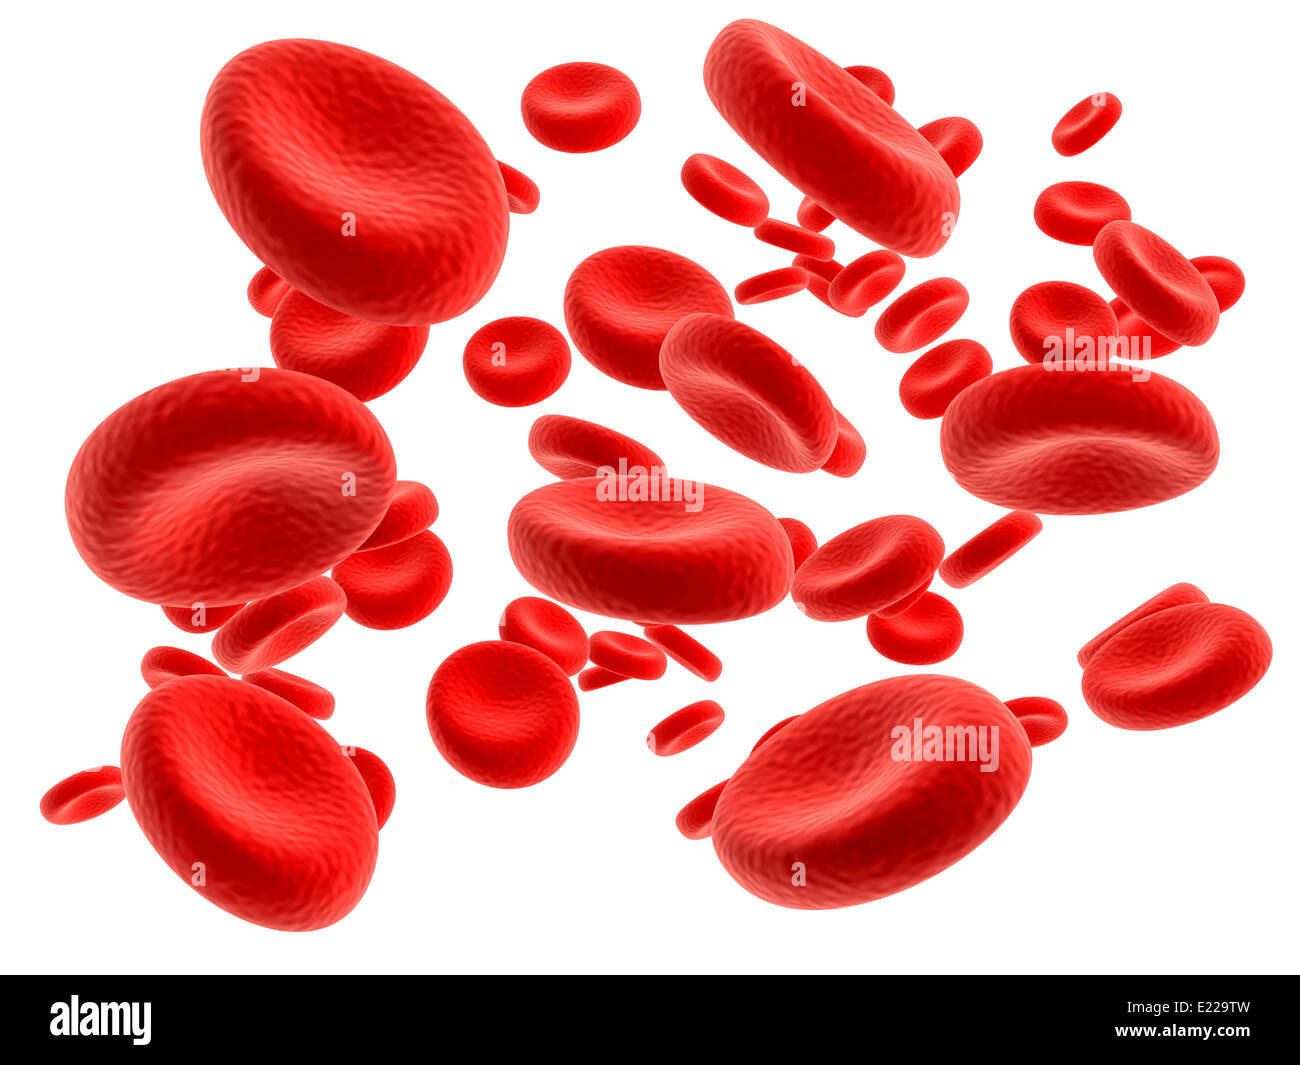 3d illustration of blood particles in focus Stock Photo